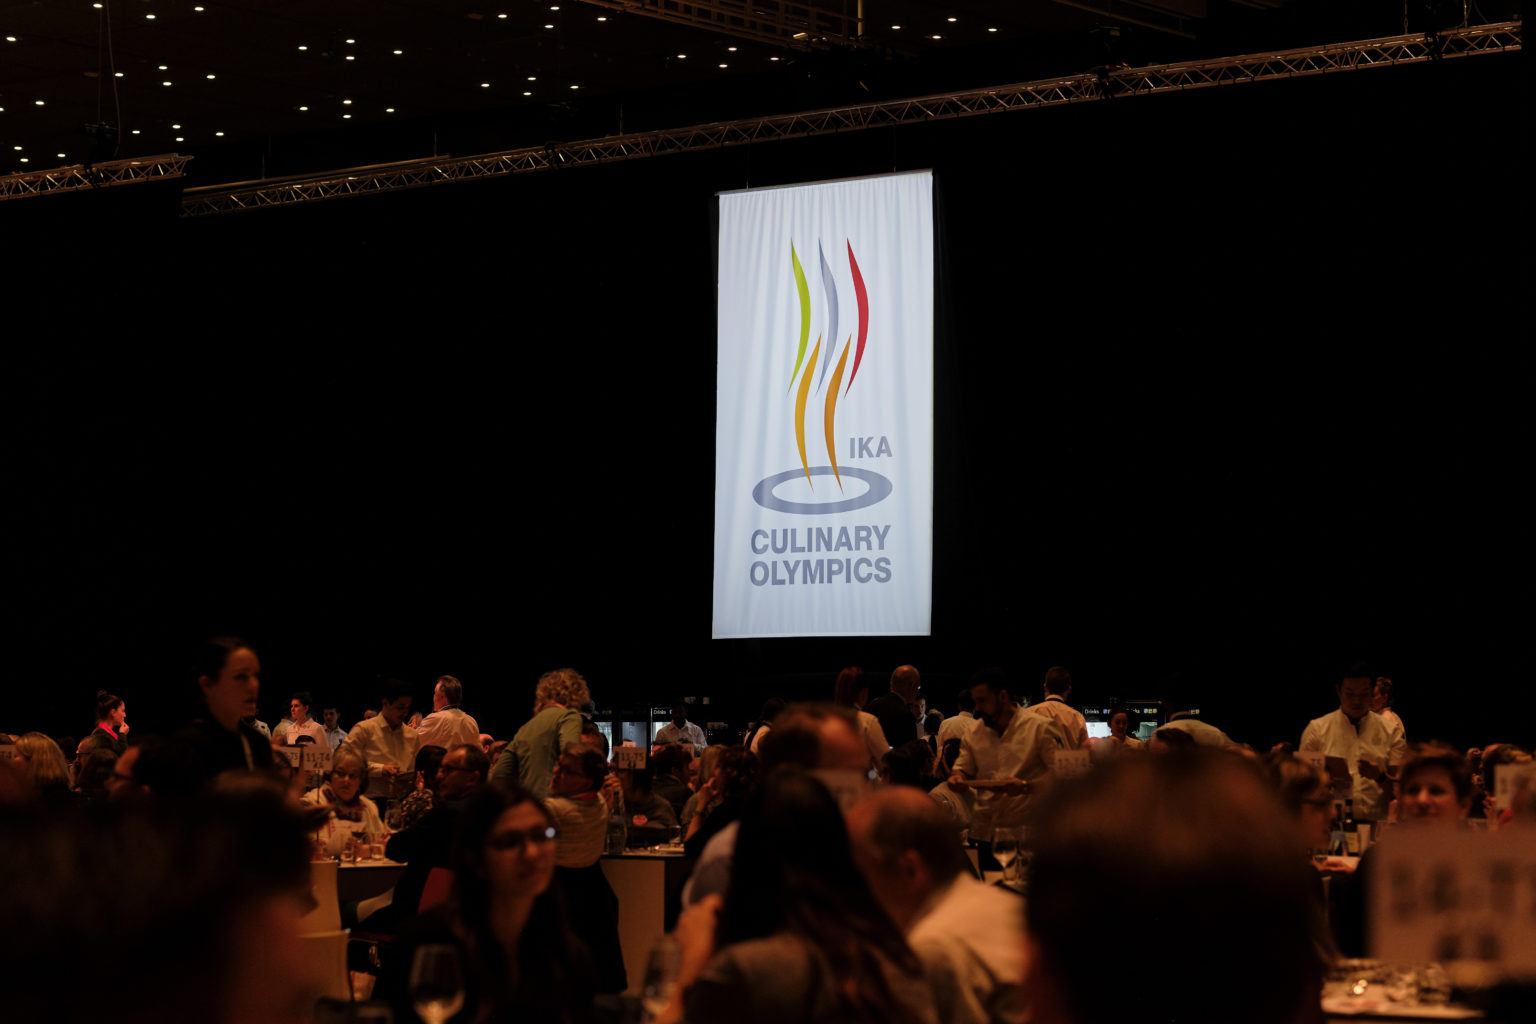 In the Restaurant of Nations at the IKA/Culinary Olympics in February